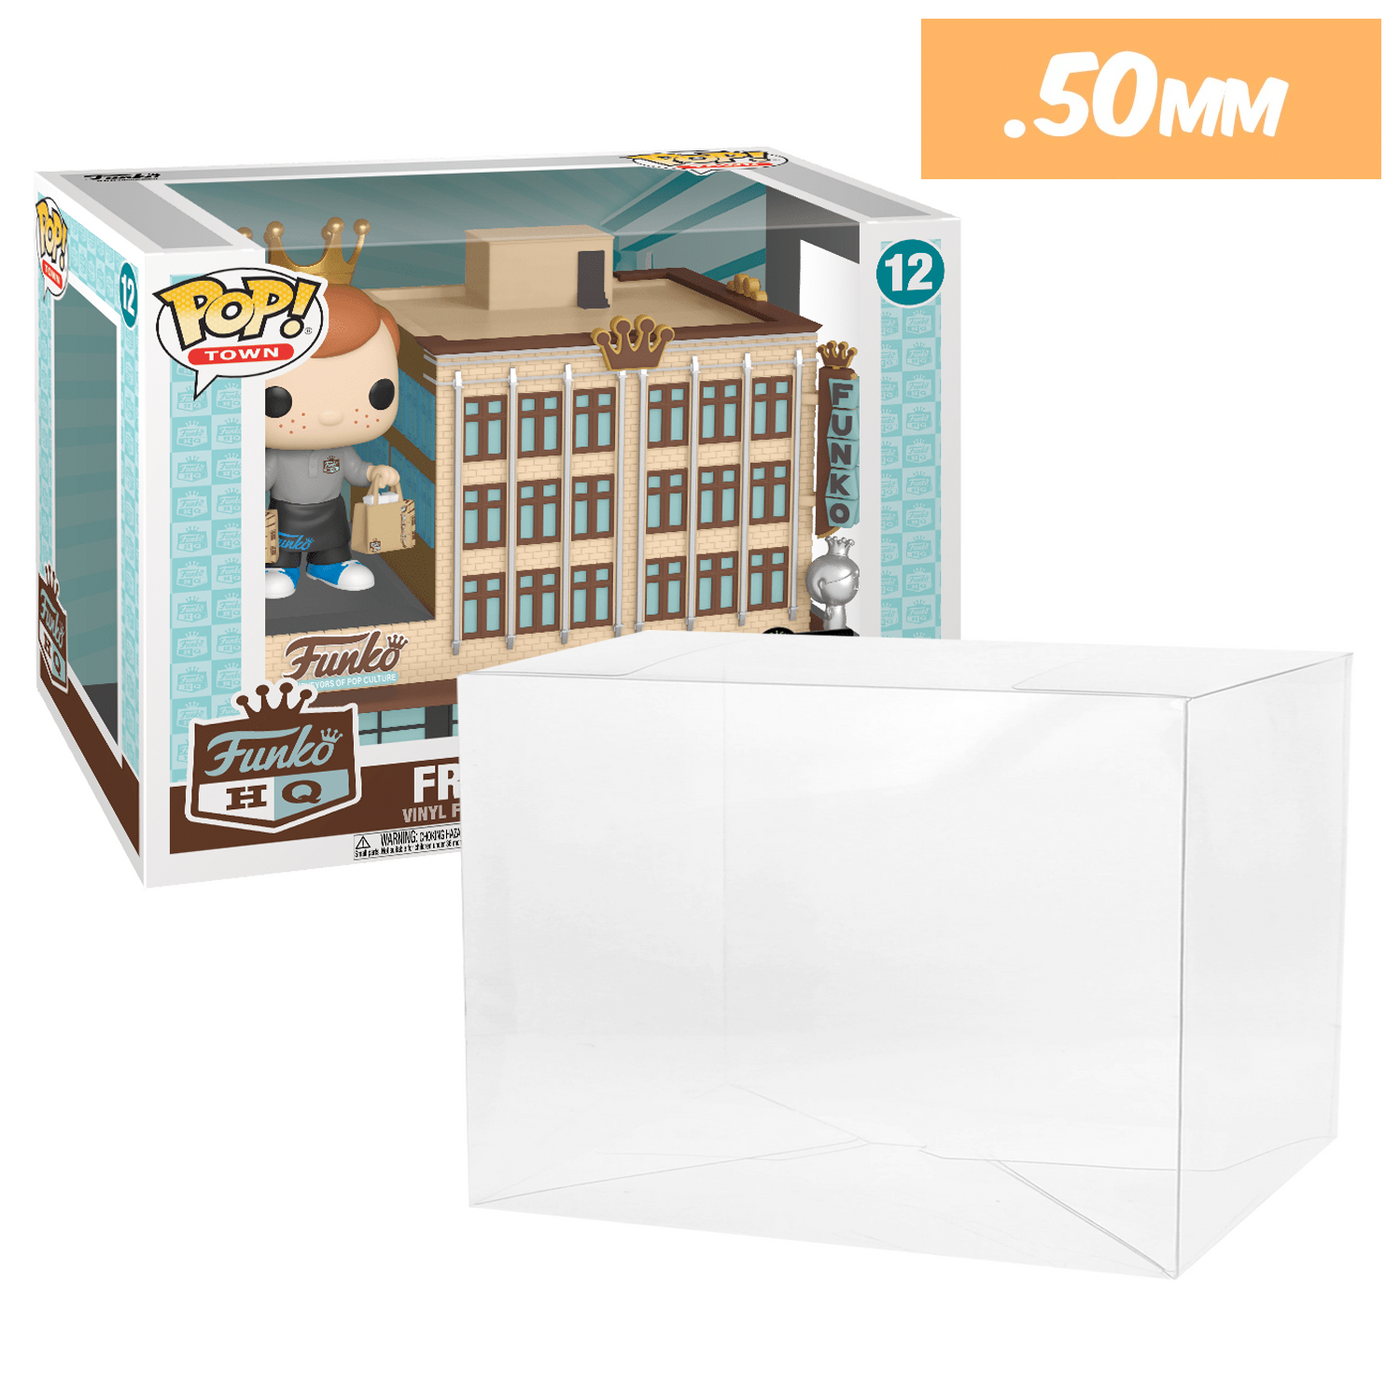 POP TOWN Freddy Funko HQ Pop Protectors for Funko Vinyl Collectible Figures, 50mm thick  popshield vaulted vinyl